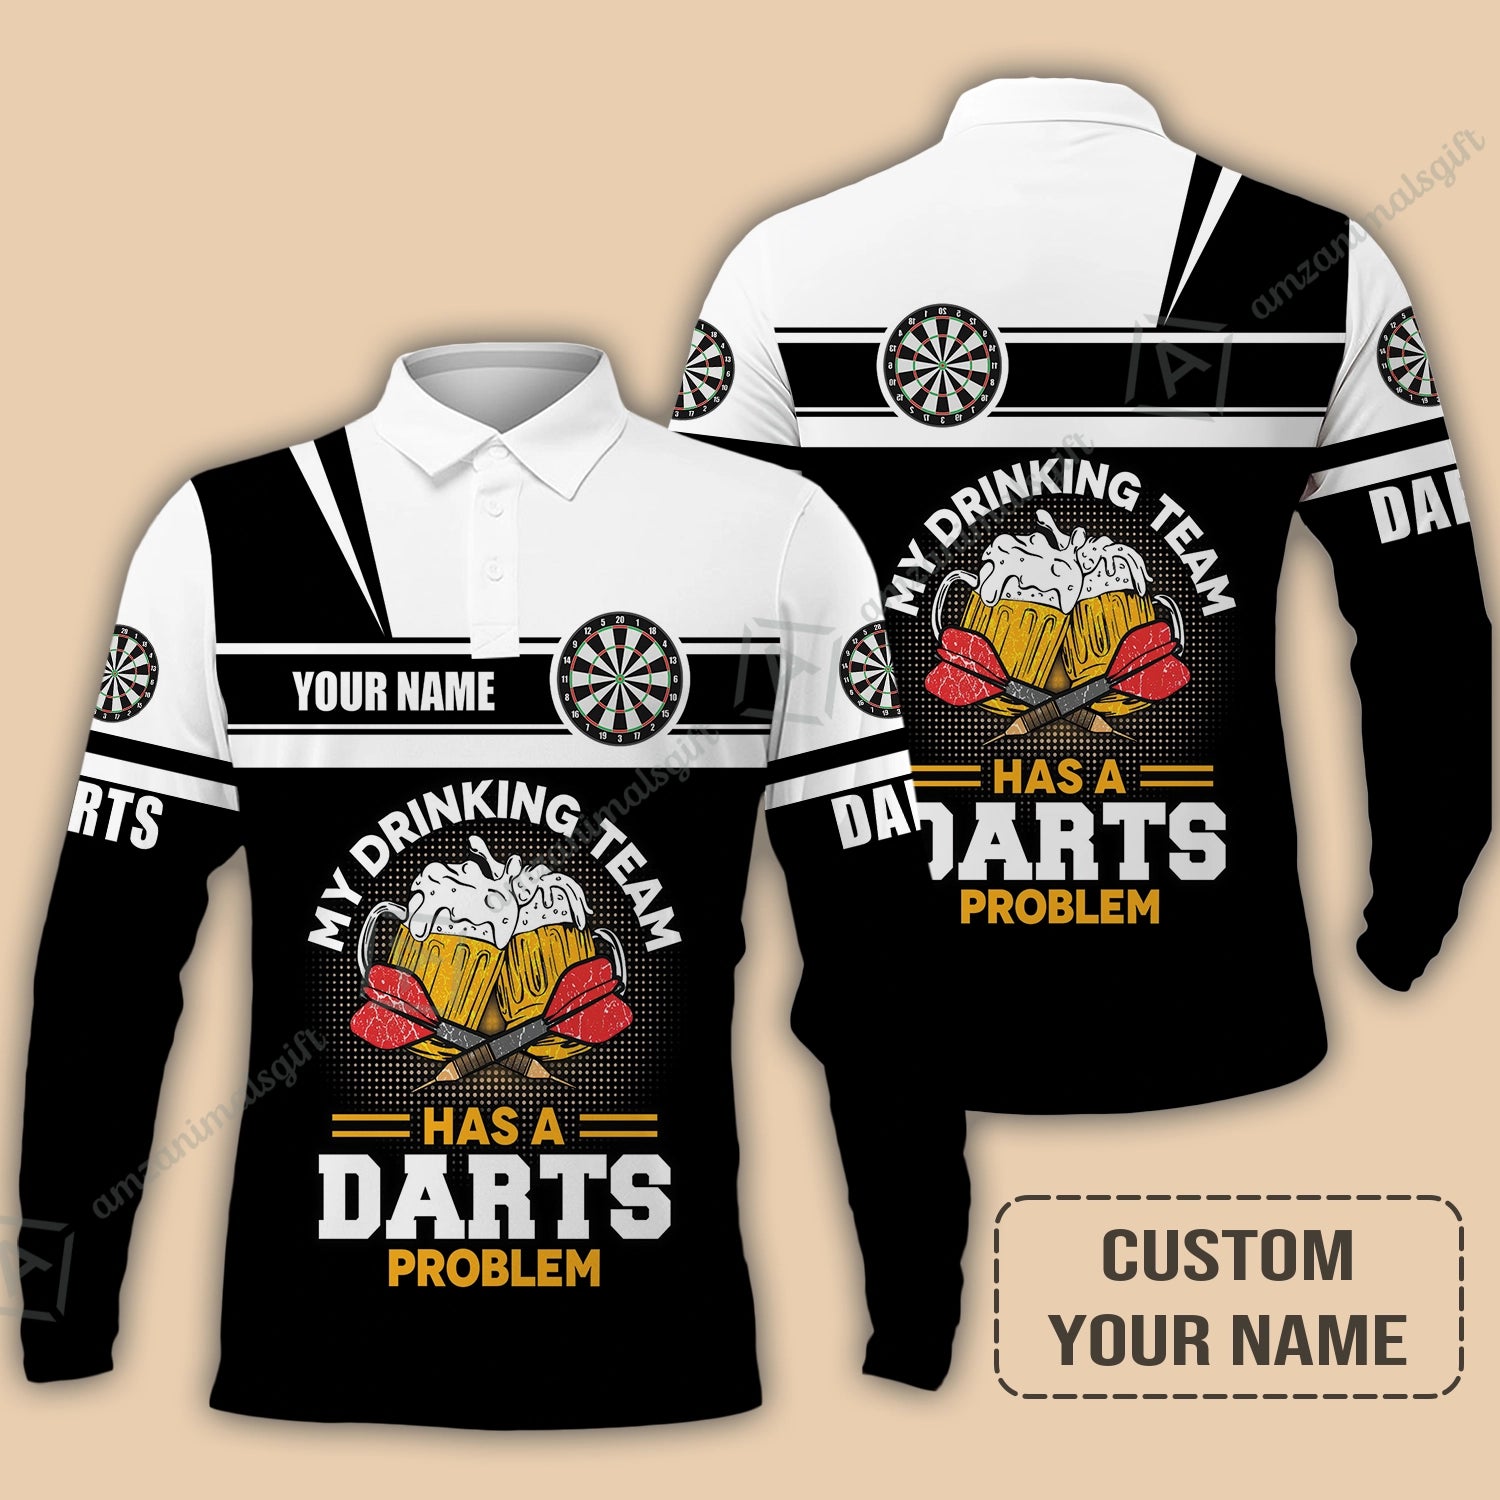 Personalized Darts Long Polo Shirt, My Drinking Team Has Darts Problem Shirt For Men And Women, Perfect Outfit For Darts Lovers, Darts Players